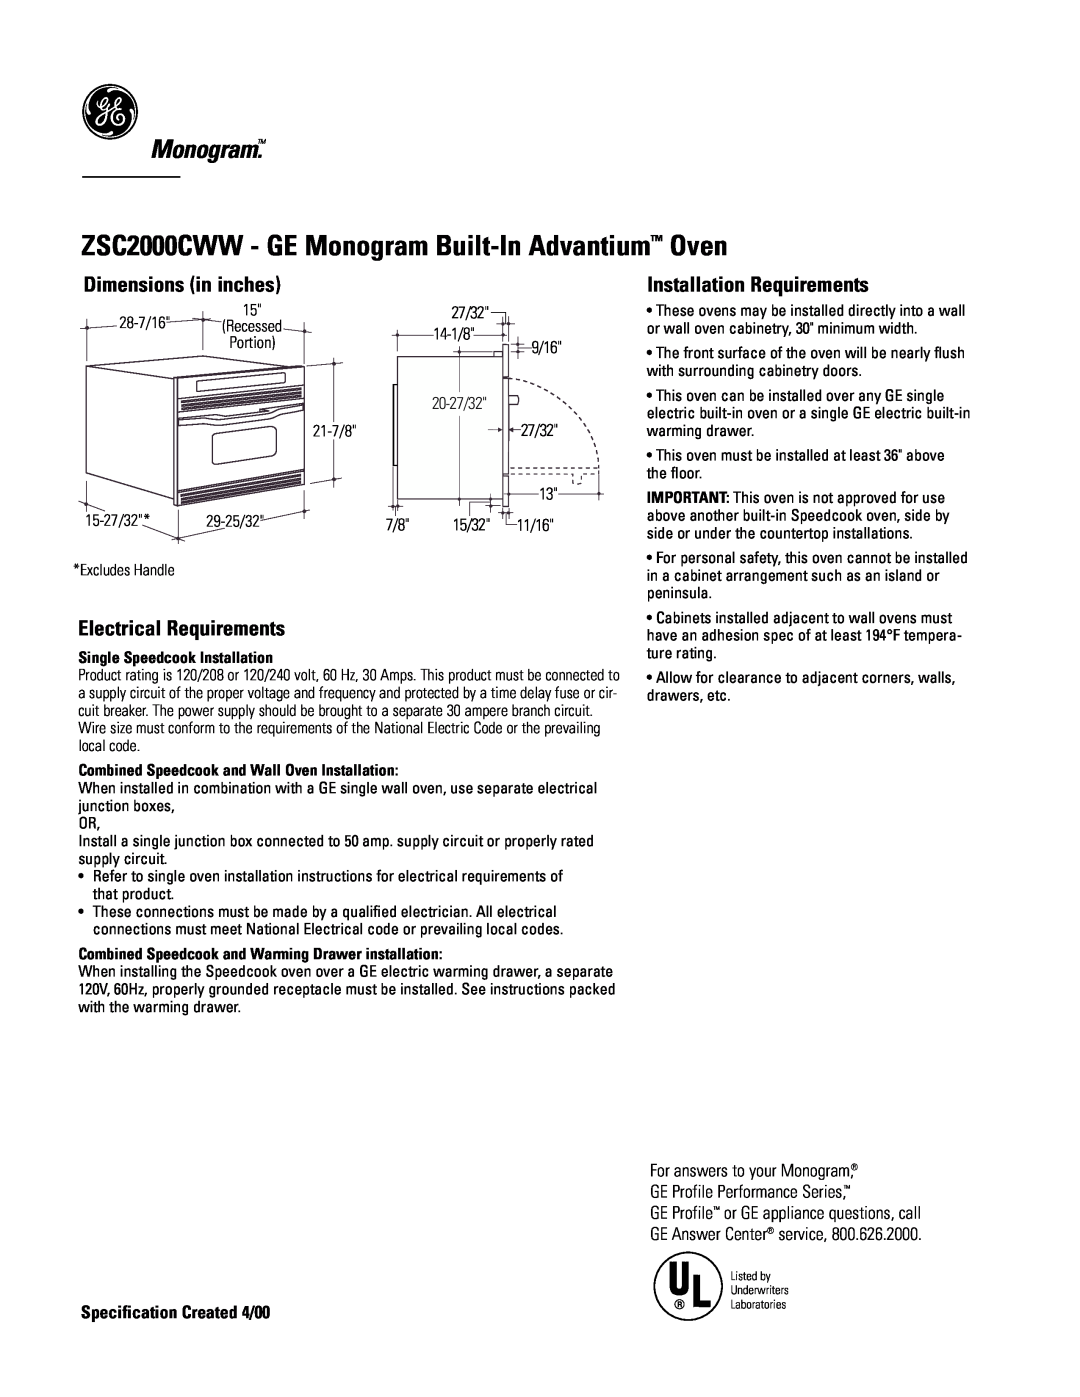 GE Monogram dimensions ZSC2000CWW - GE Monogram Built-In Advantium Oven, Dimensions in inches, Electrical Requirements 